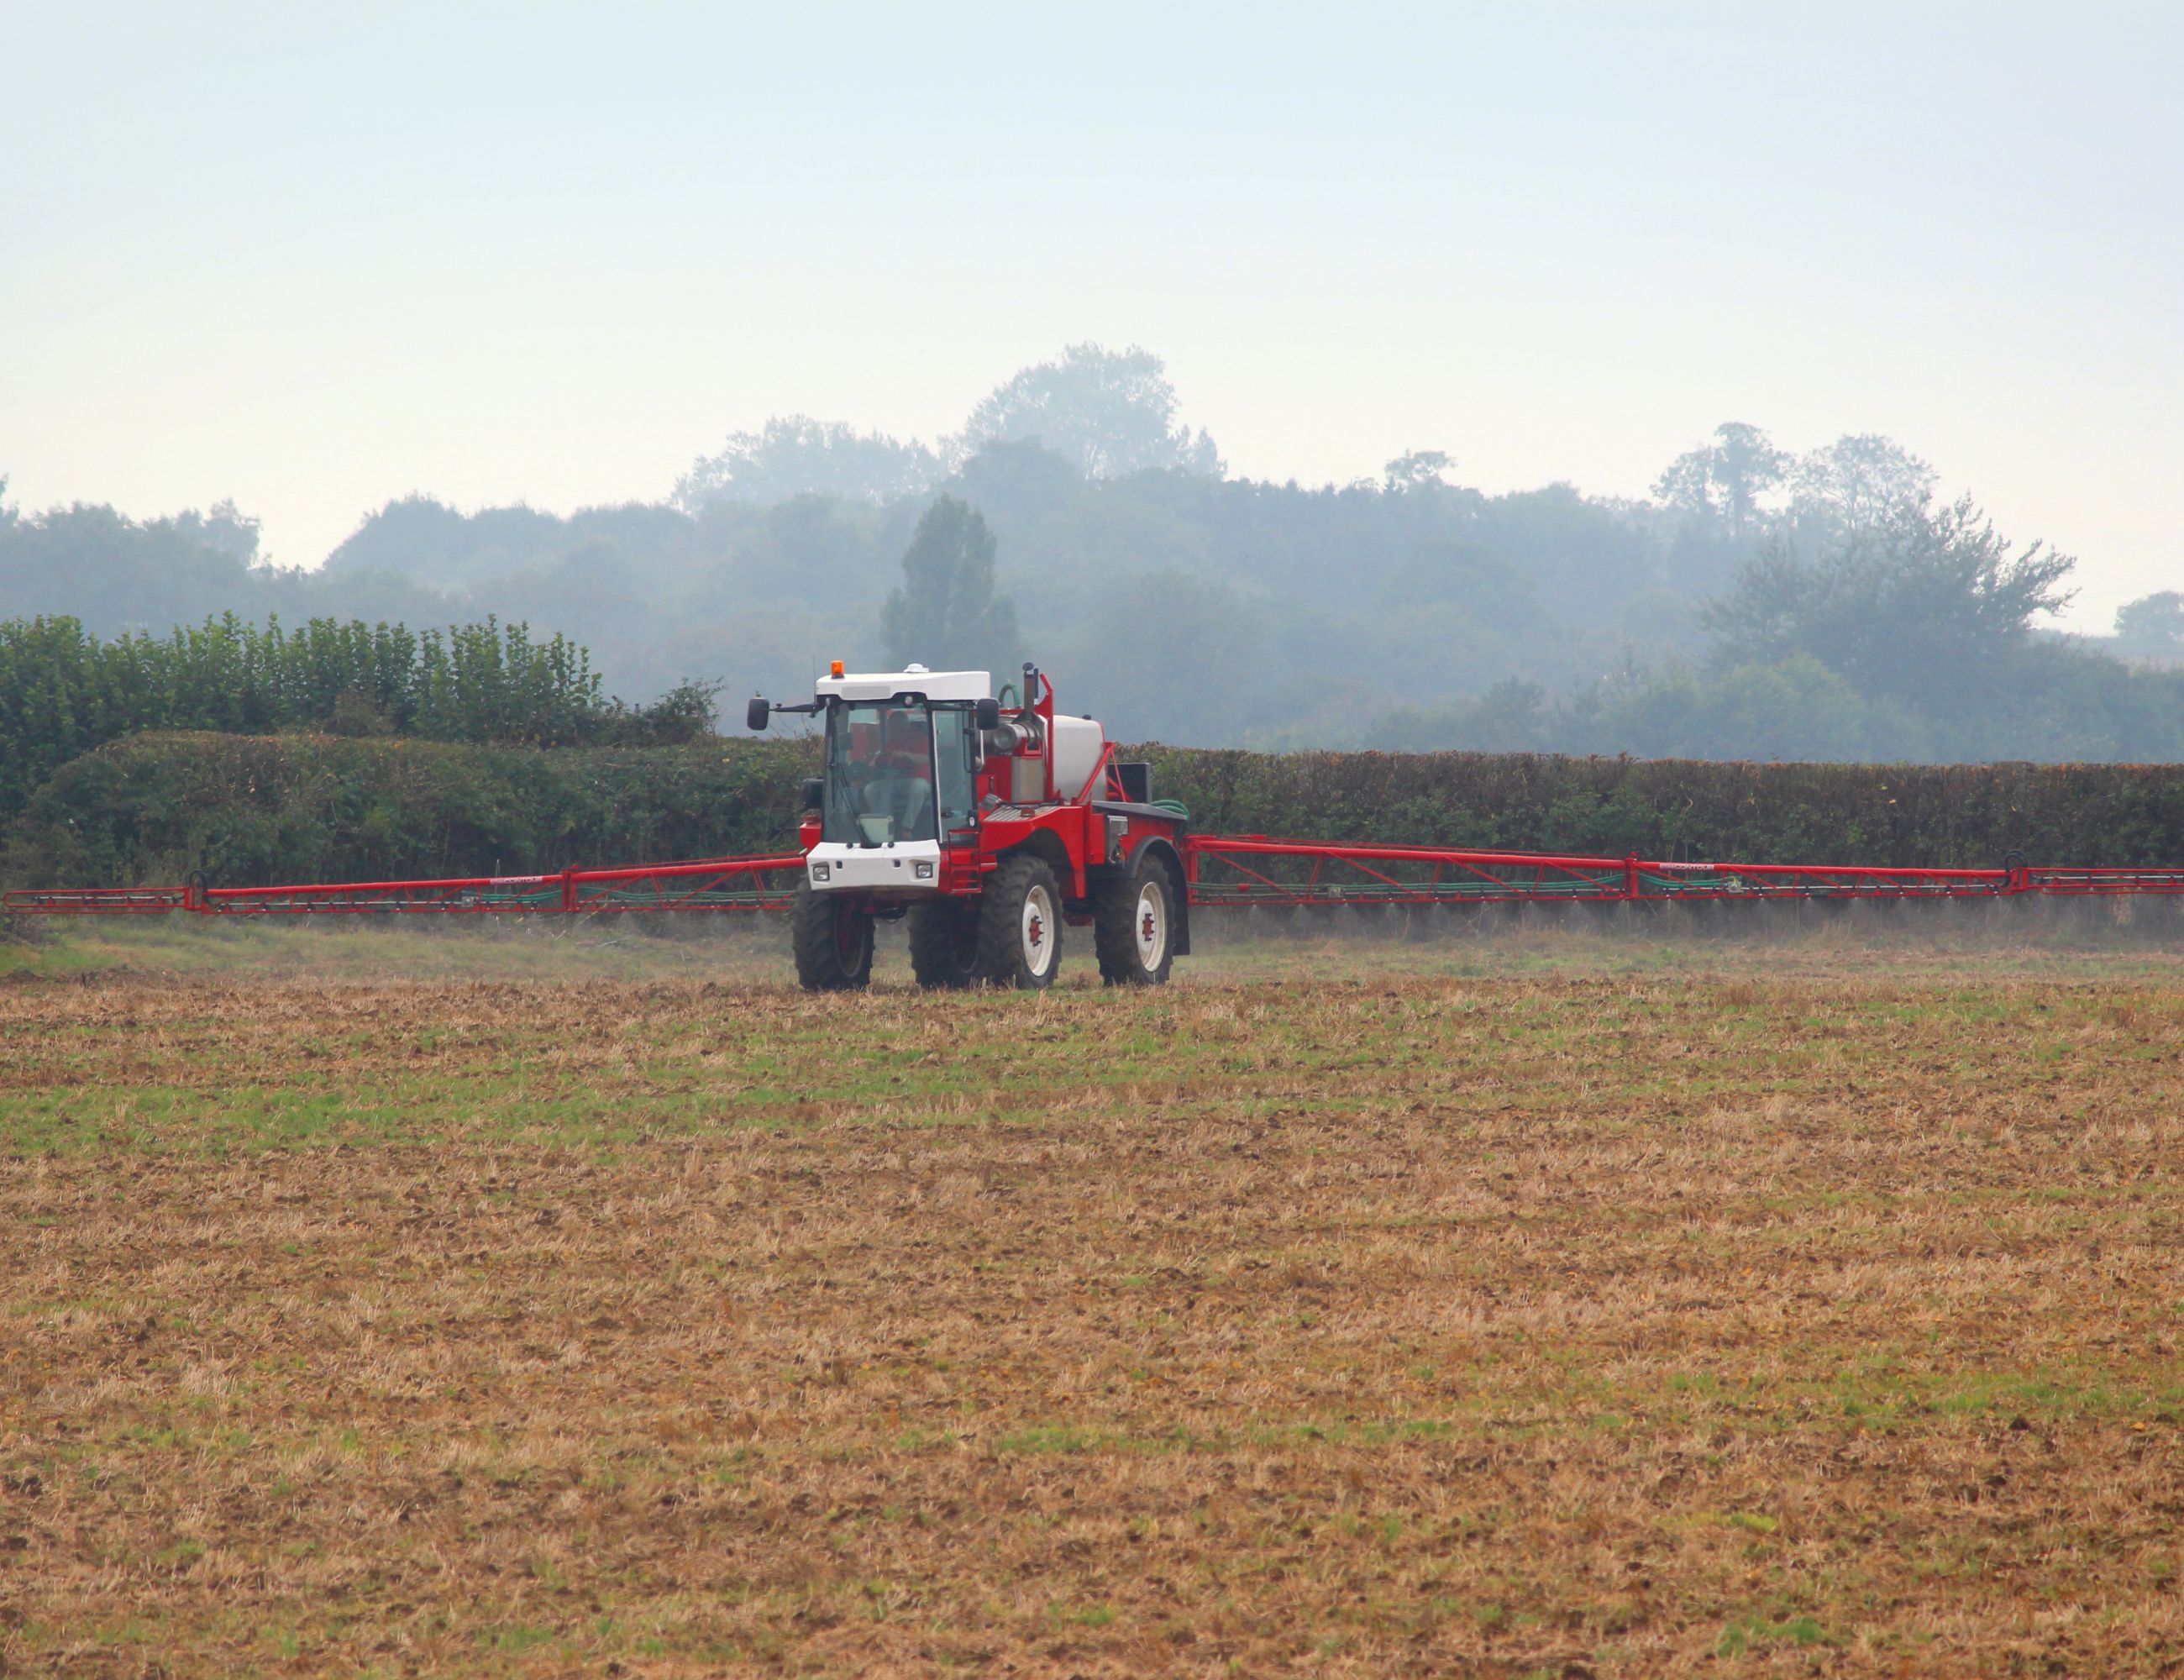 Tractor spraying a field with pesticides